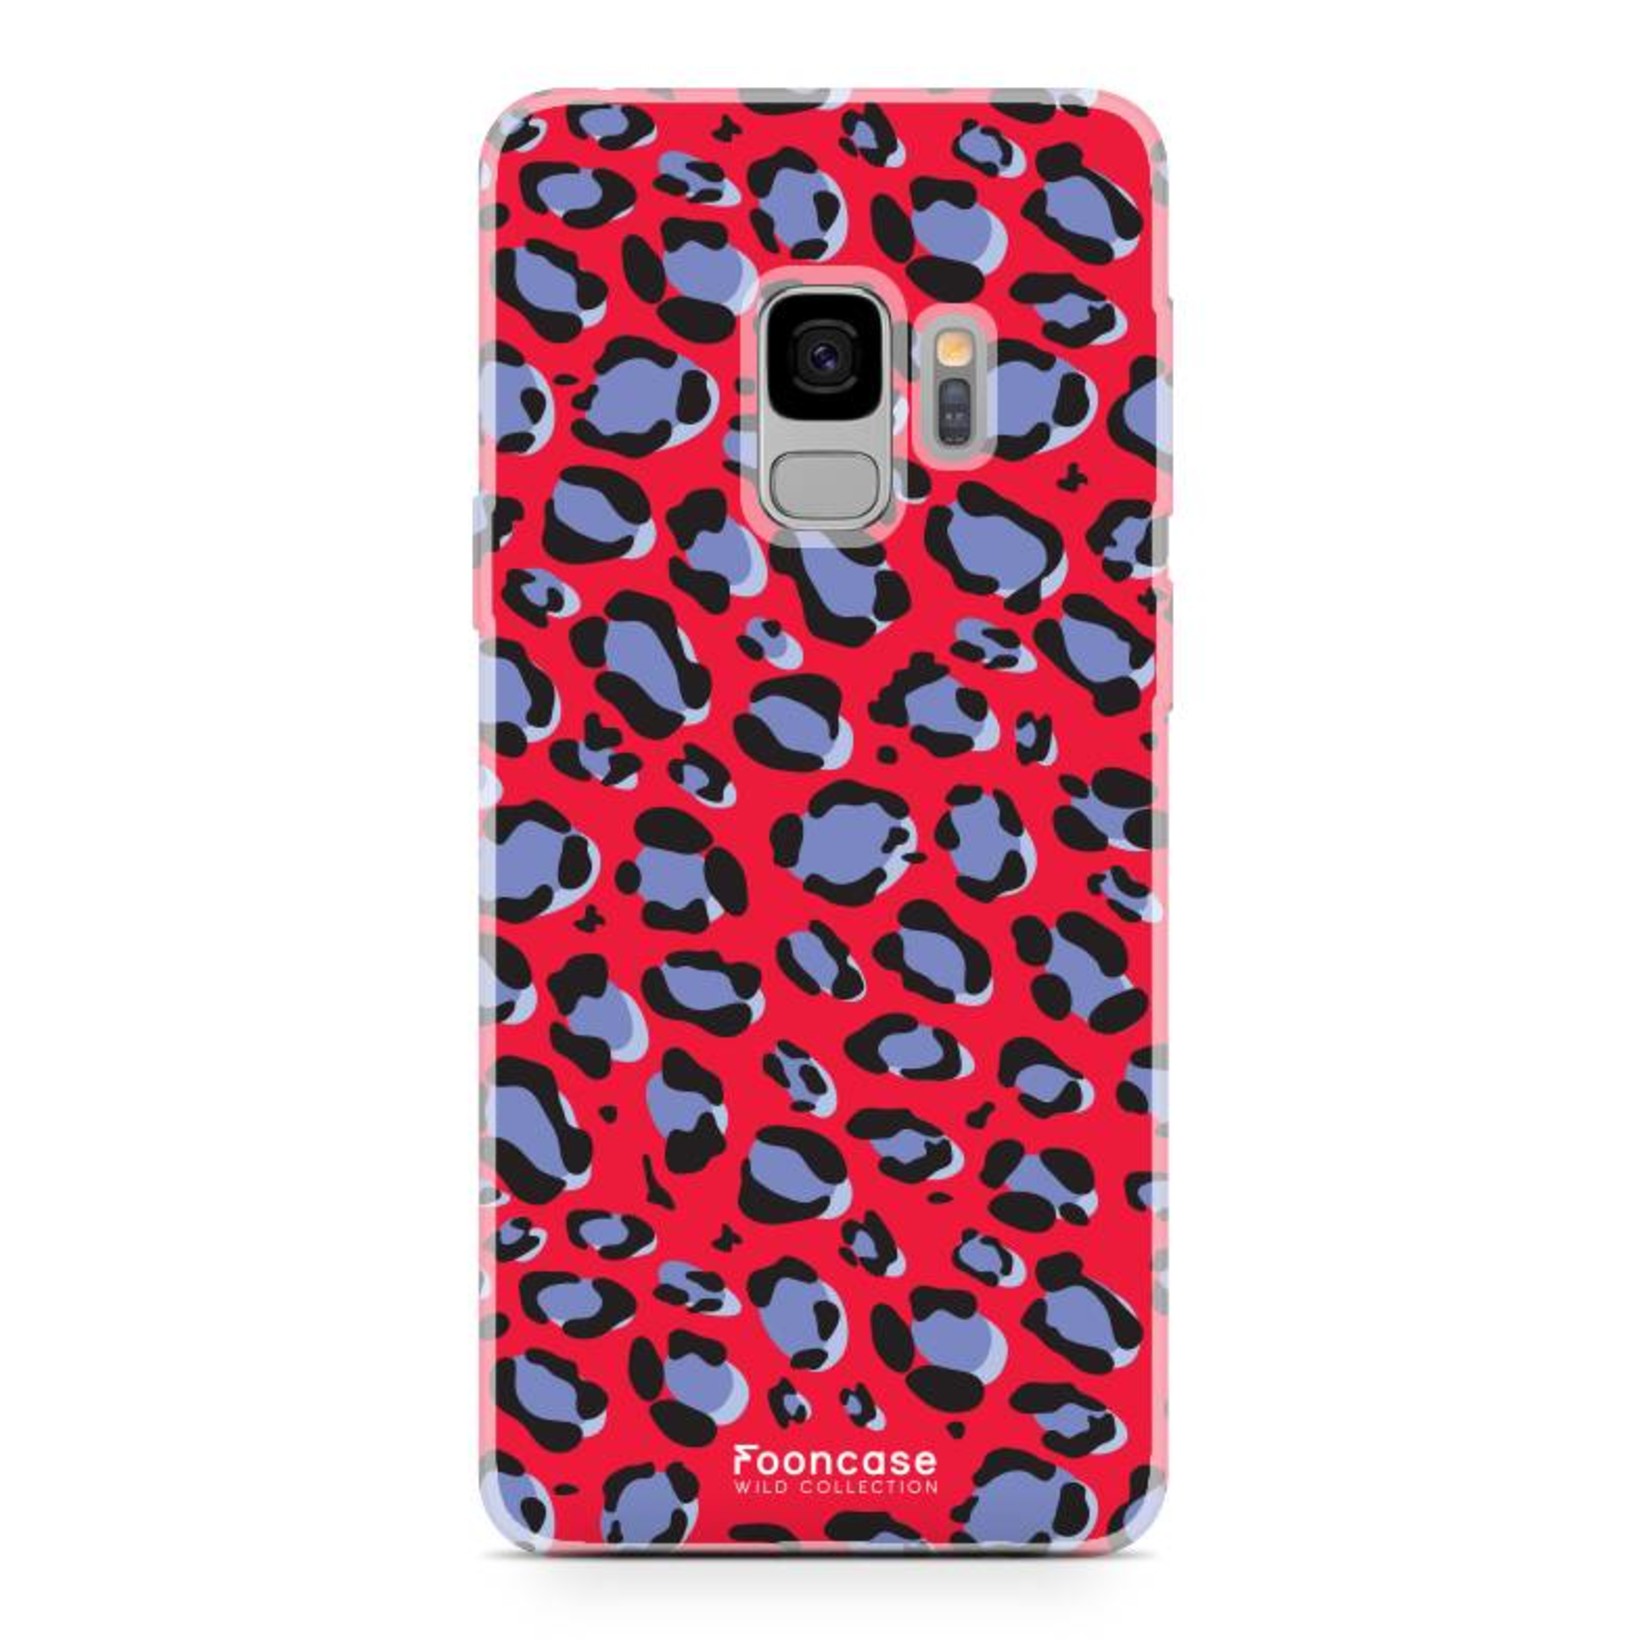 FOONCASE Samsung Galaxy S9 - WILD COLLECTION / Rot